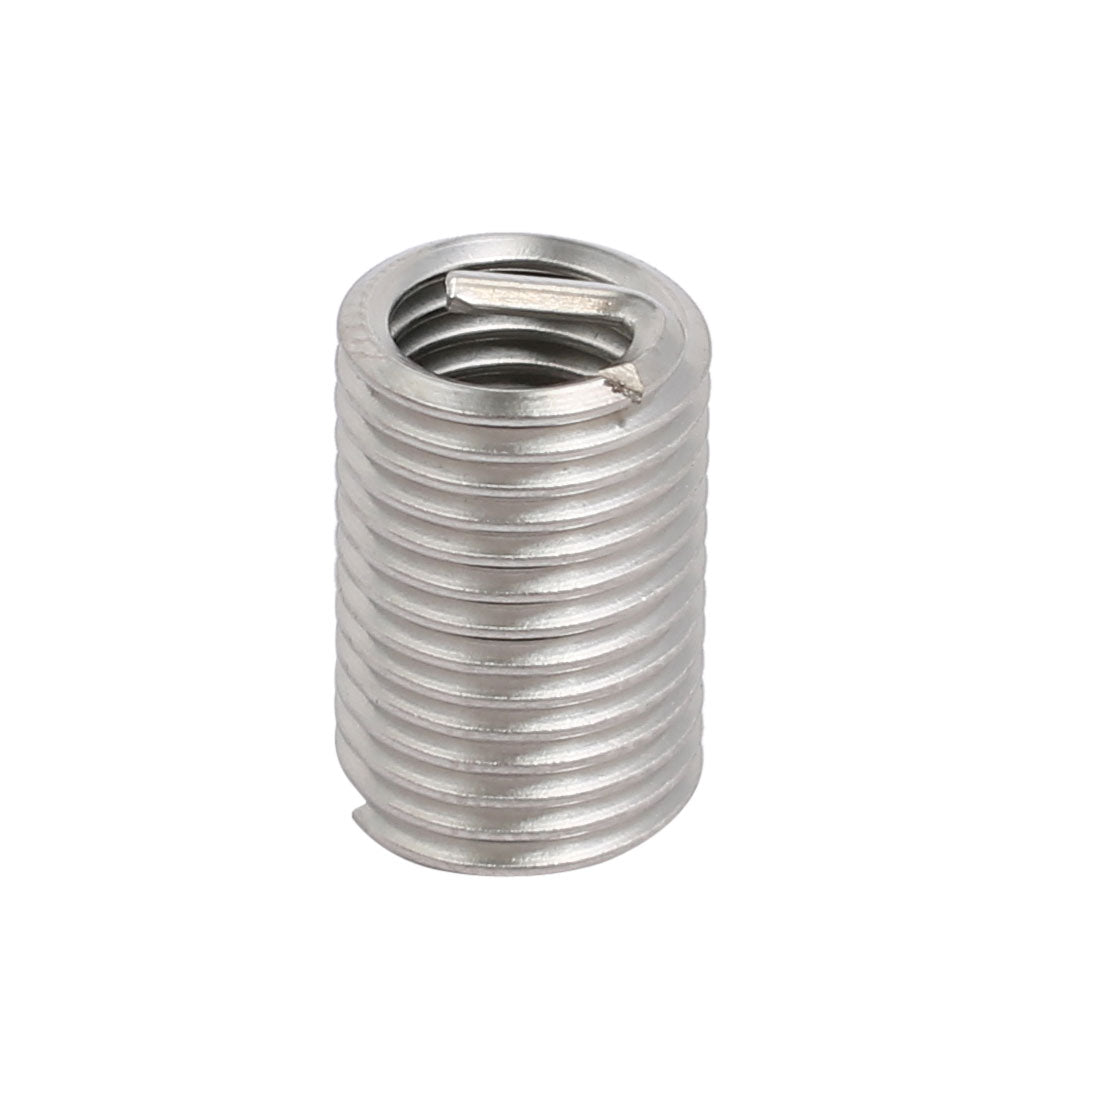 uxcell Uxcell M8x1.25mmx20mm 304 Stainless Steel Helical Coil Wire Thread Insert 25pcs